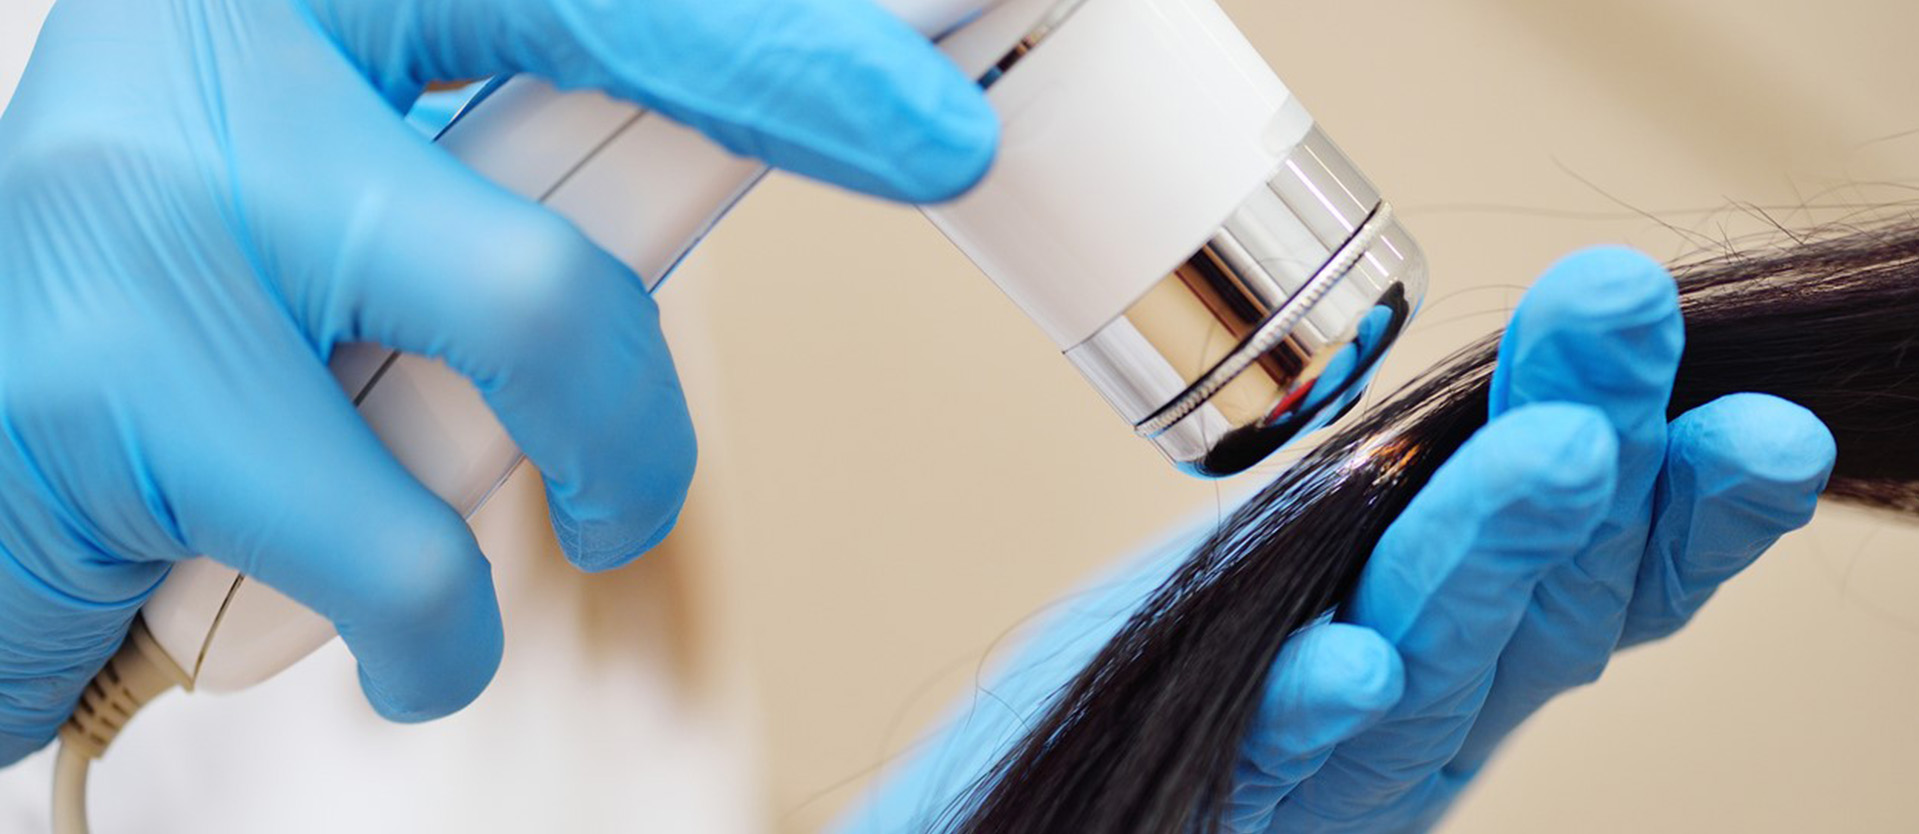 Exosome Treatments for Hair Loss: How Does It Work?